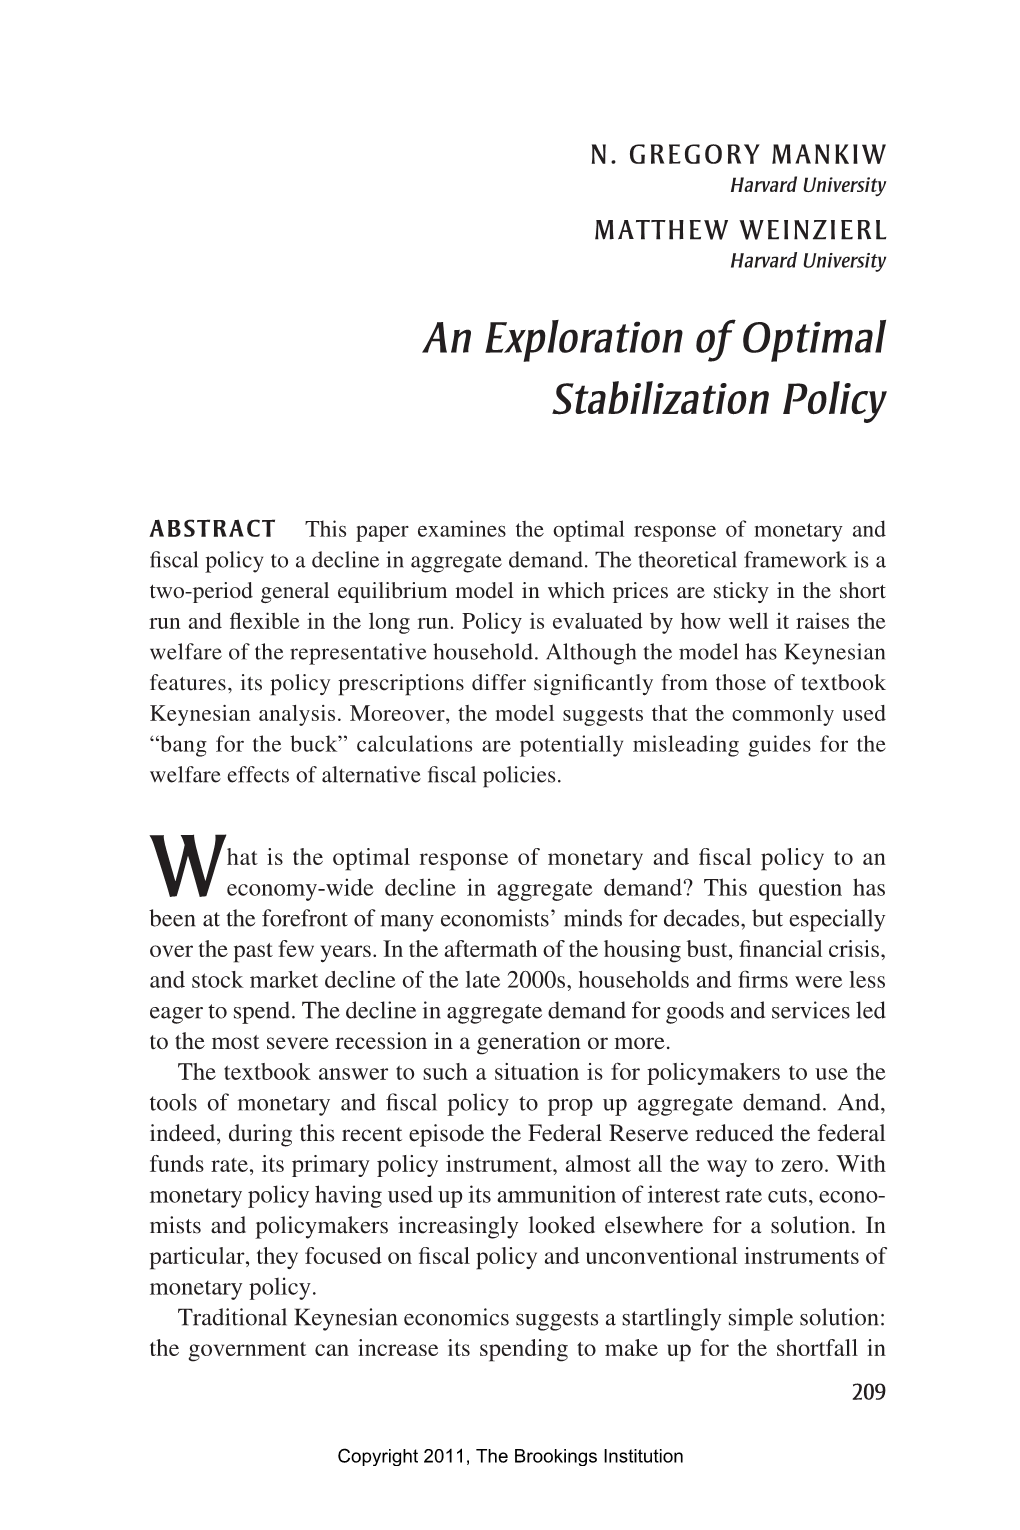 An Exploration of Optimal Stabilization Policy